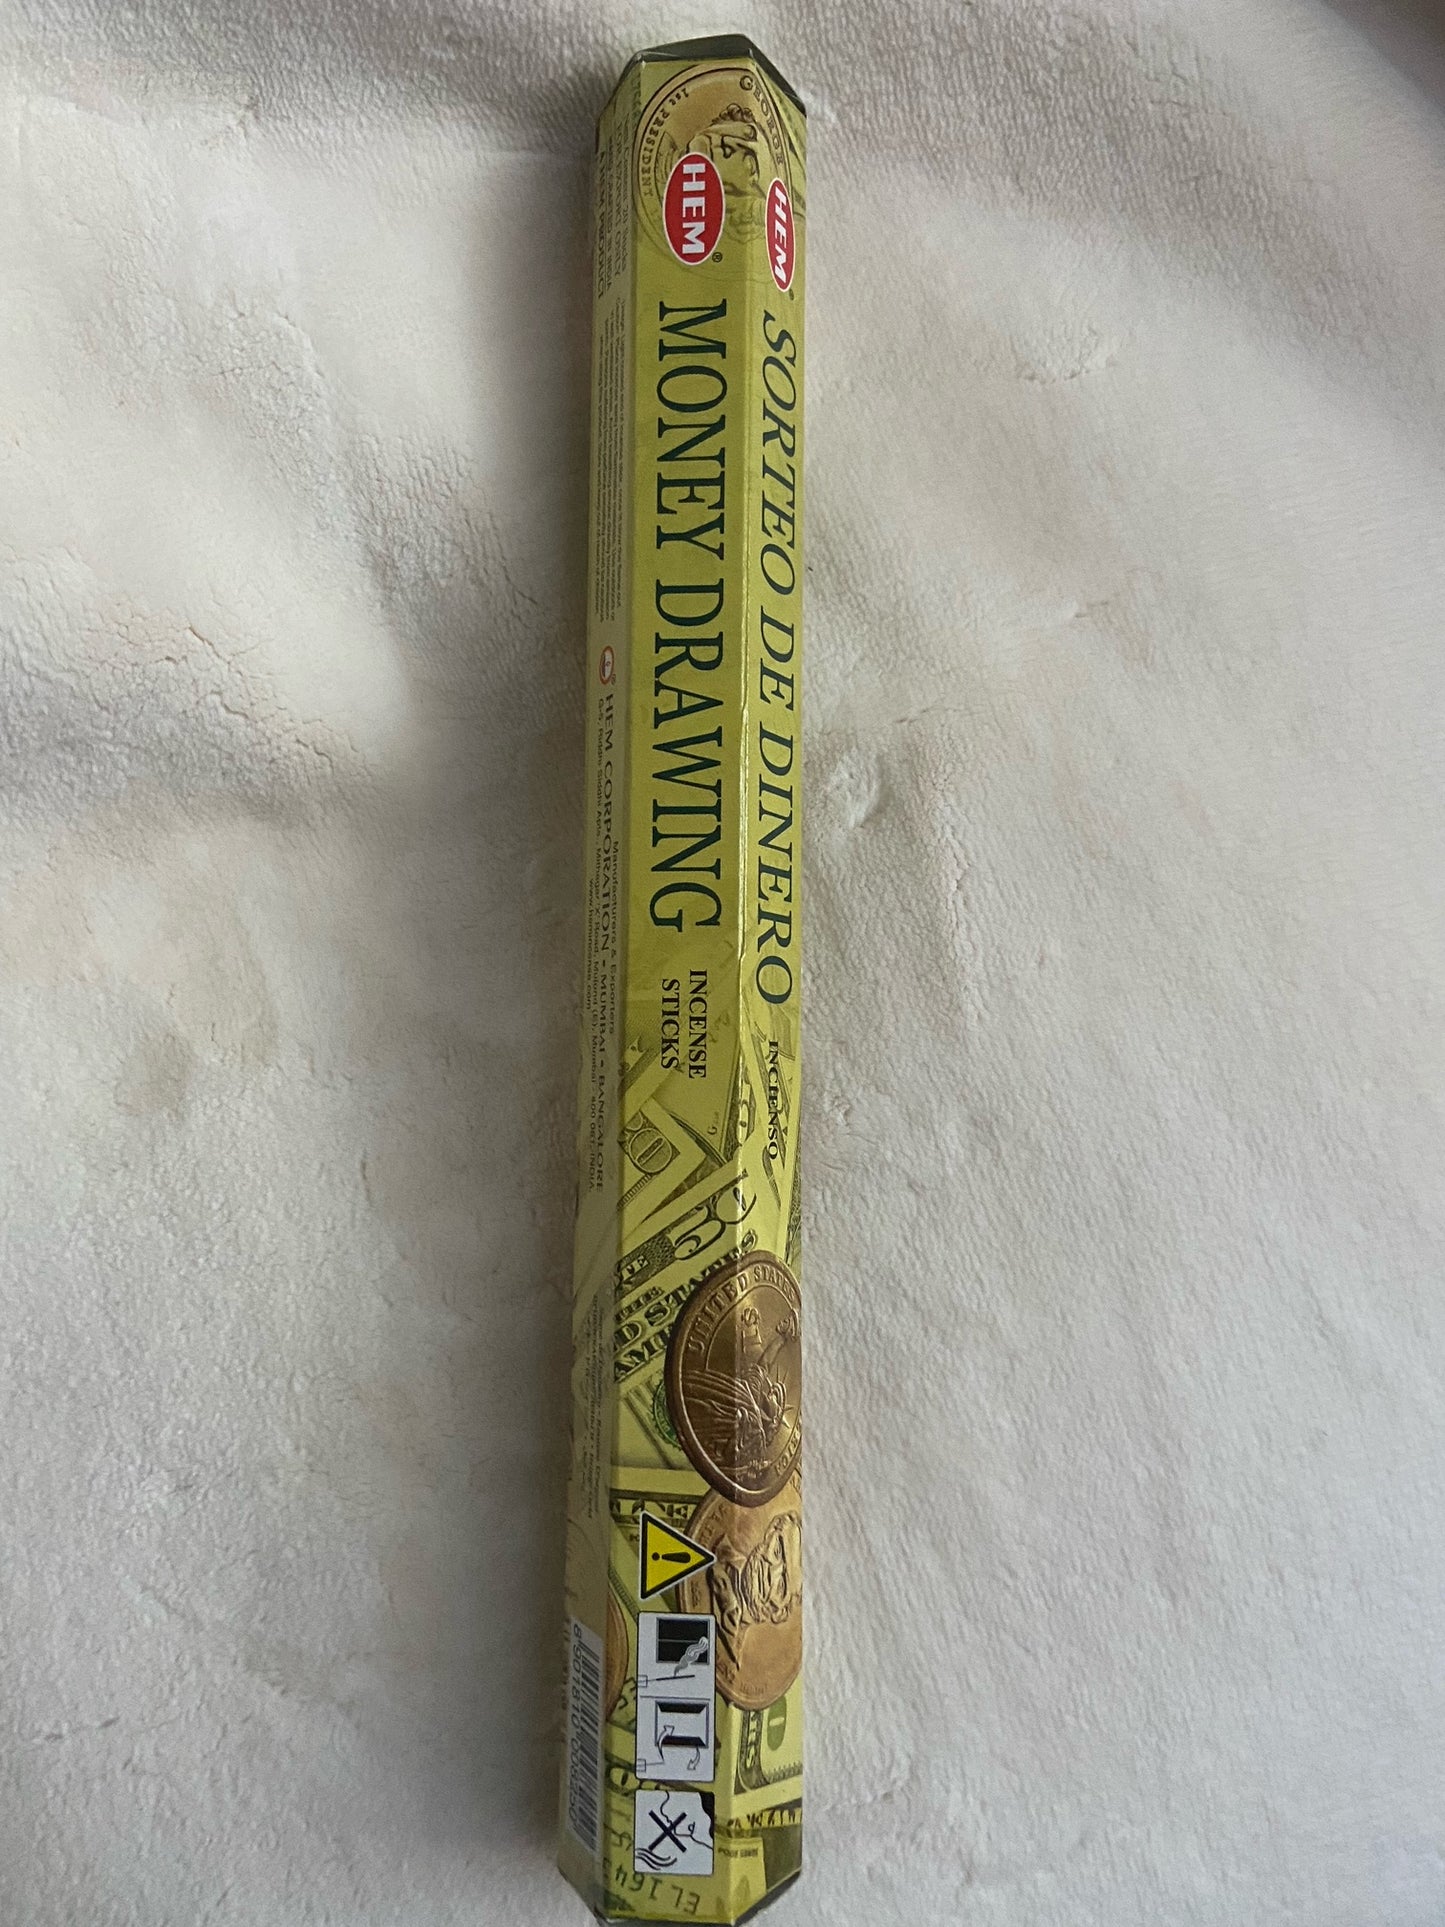  Money Drawing Incense - Incense available at Amazing Creations Products . Grab yours for $4.99 today!